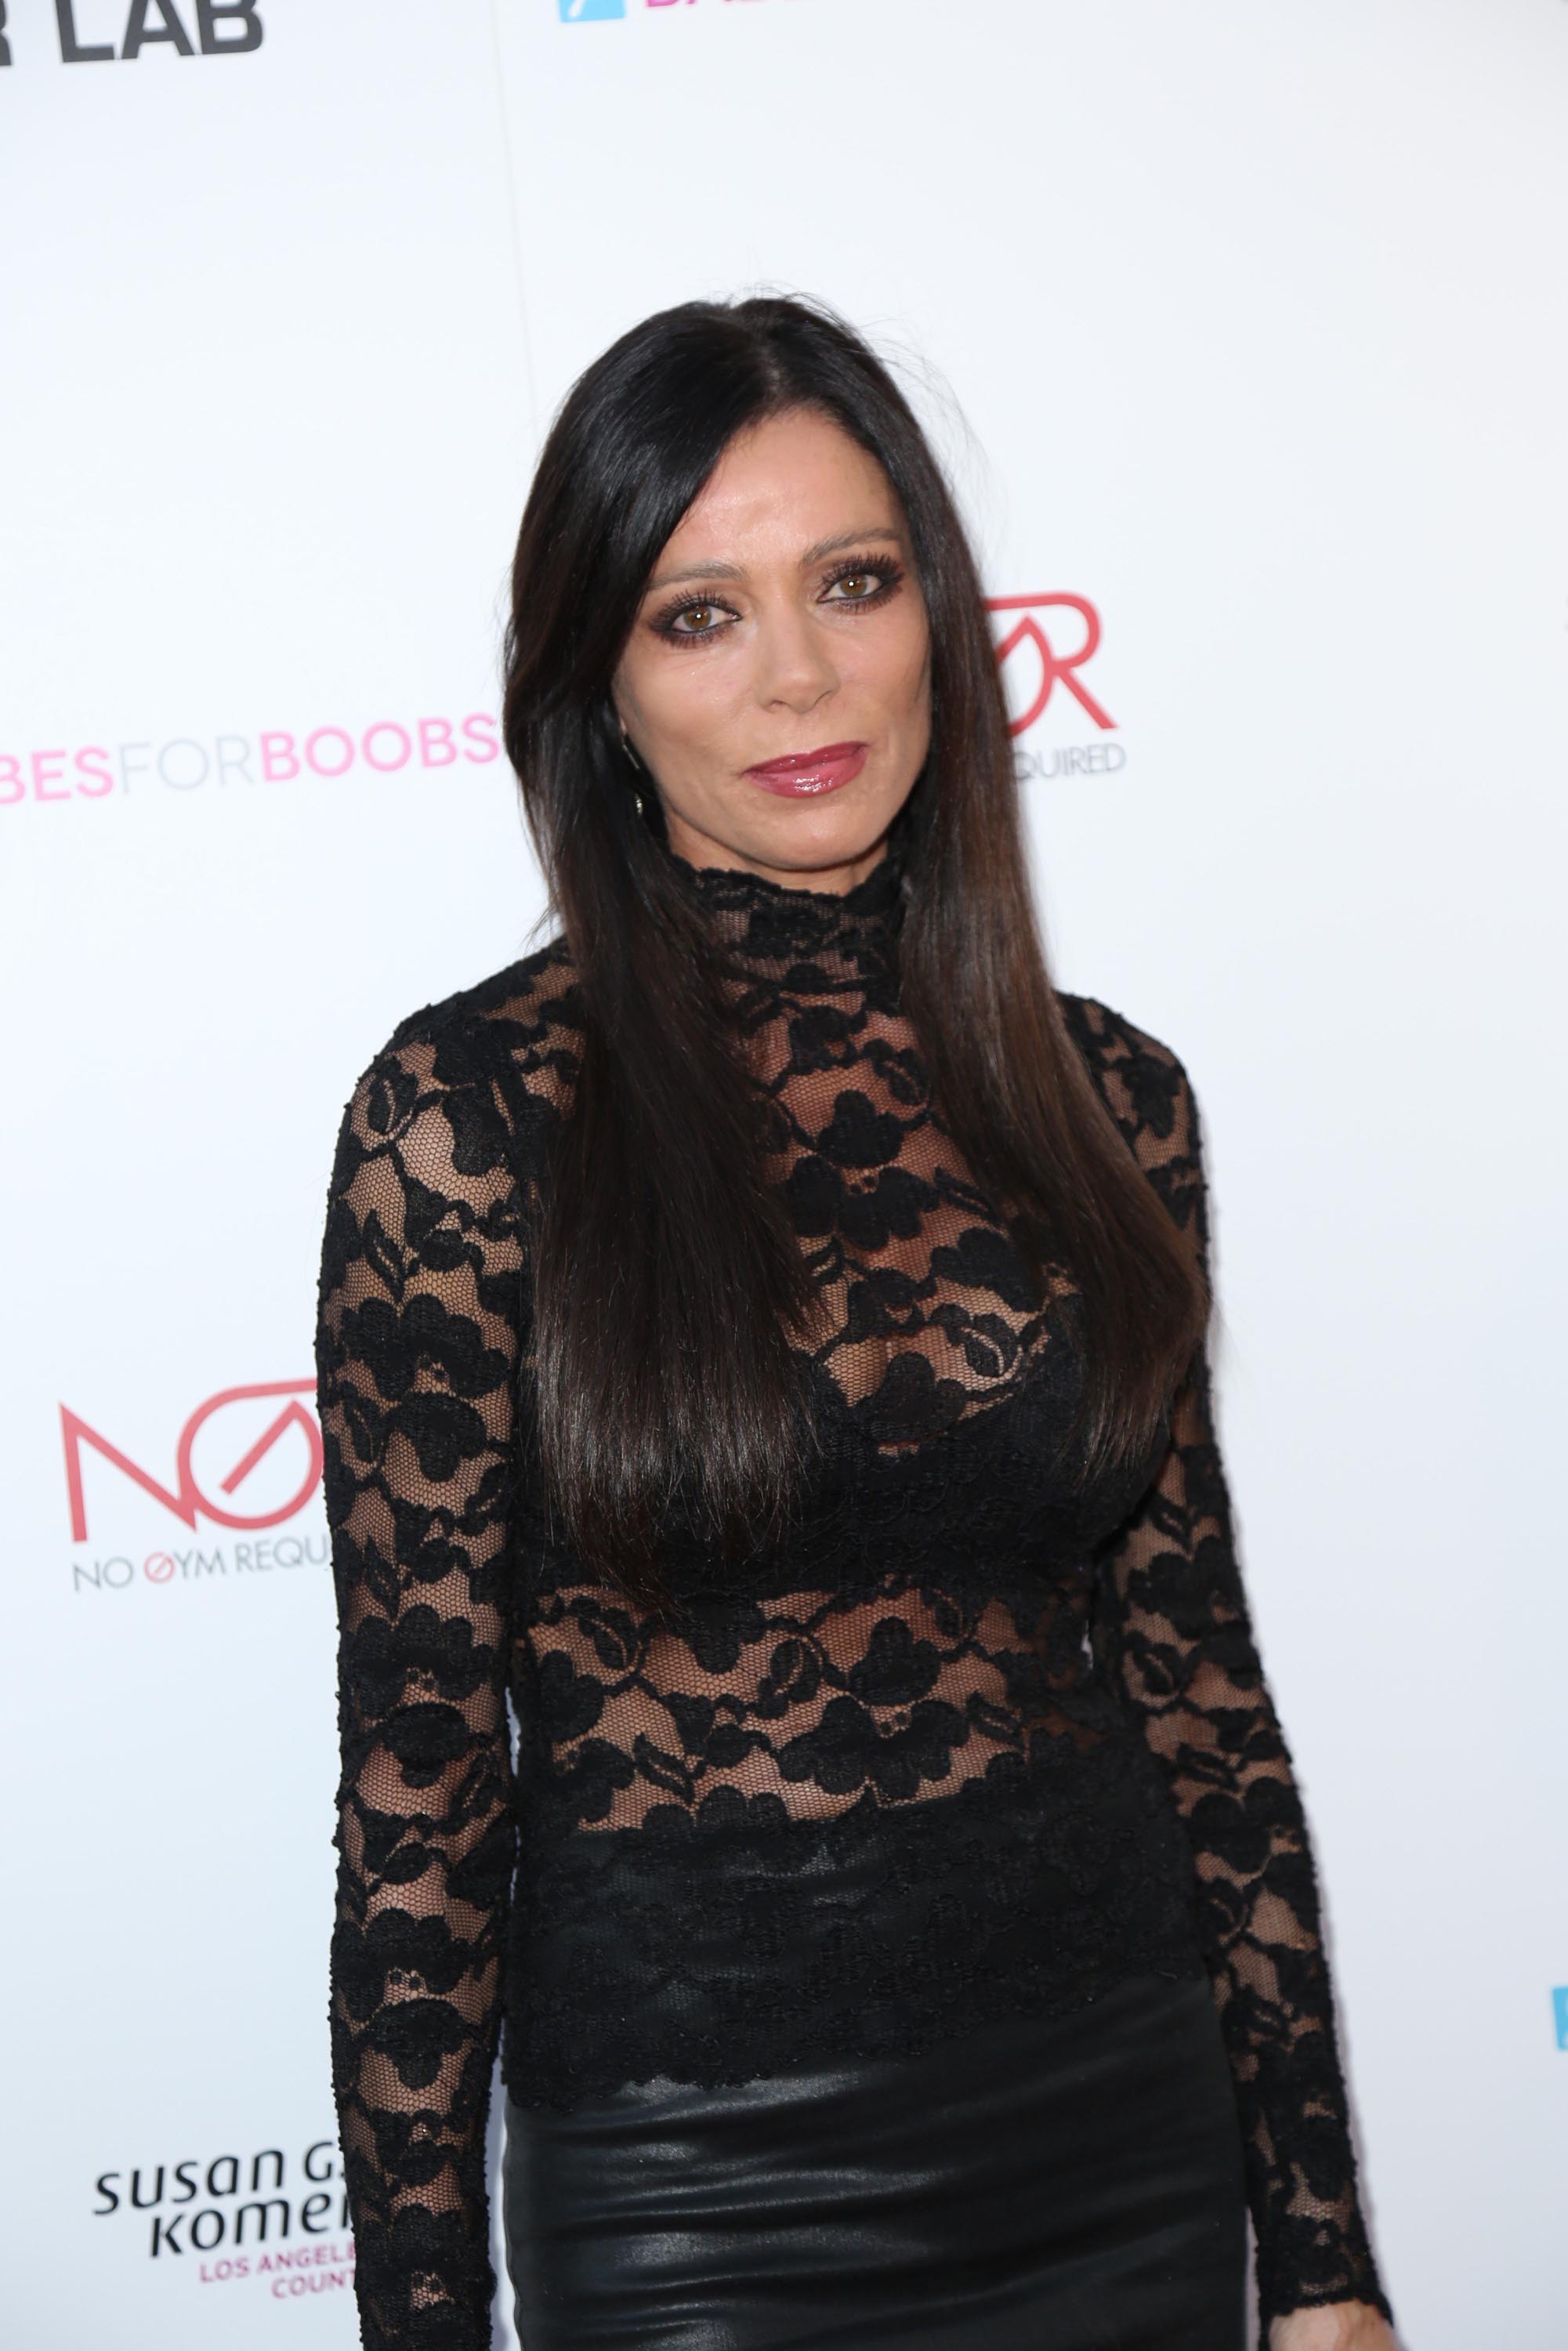 Carlton Gebbia was pictured at Babes For Boobs Live Bachehelor Auction For Breast Cancer Research